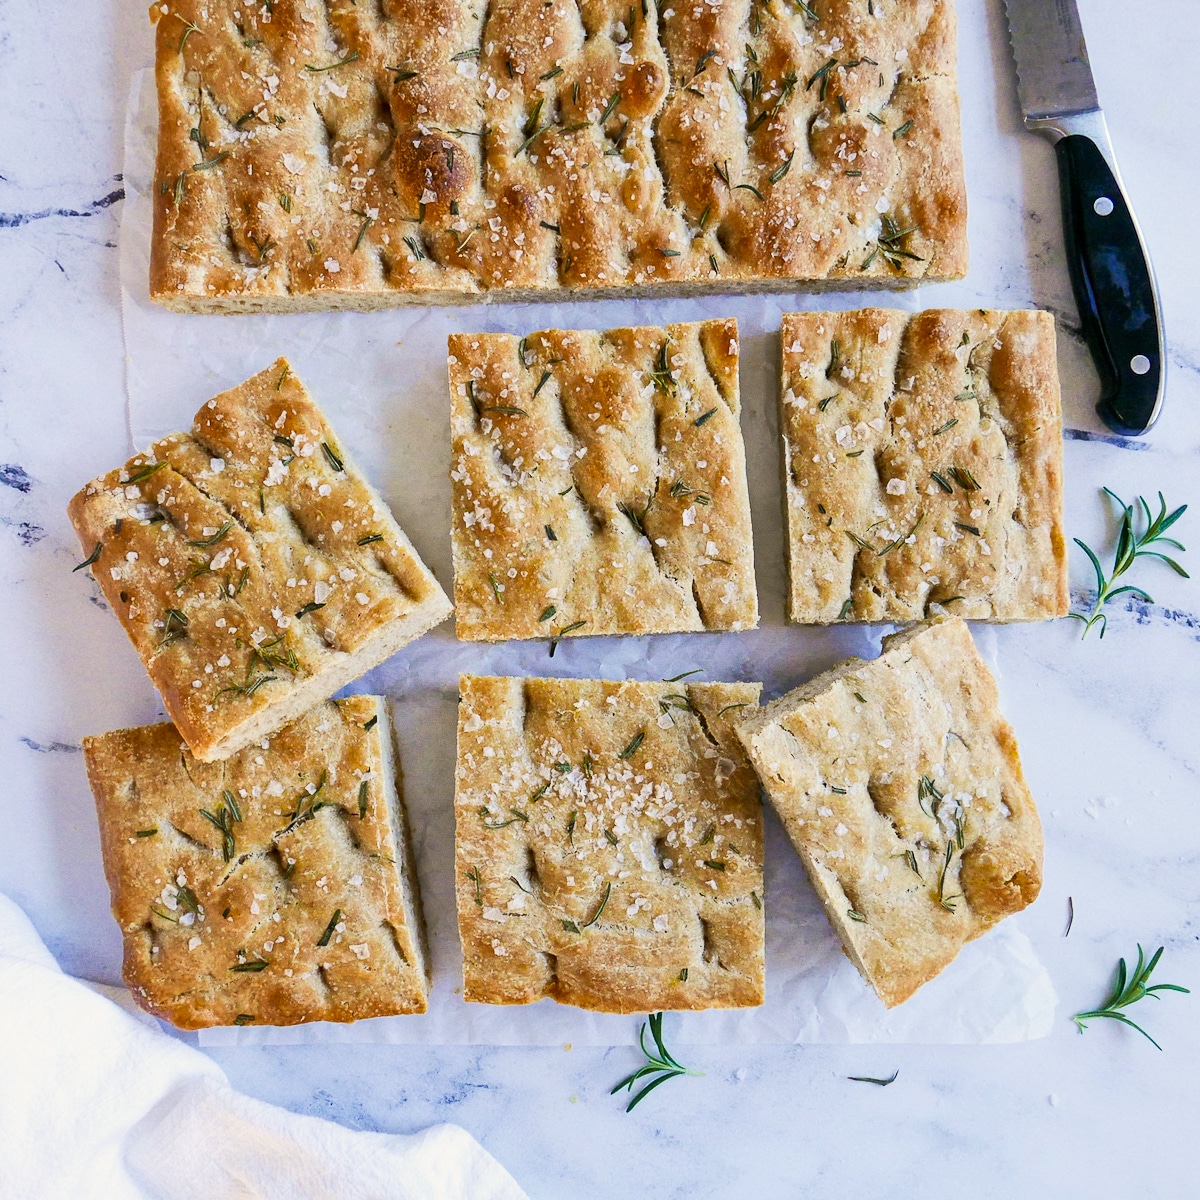 focaccia sliced into squares on parchment paper.